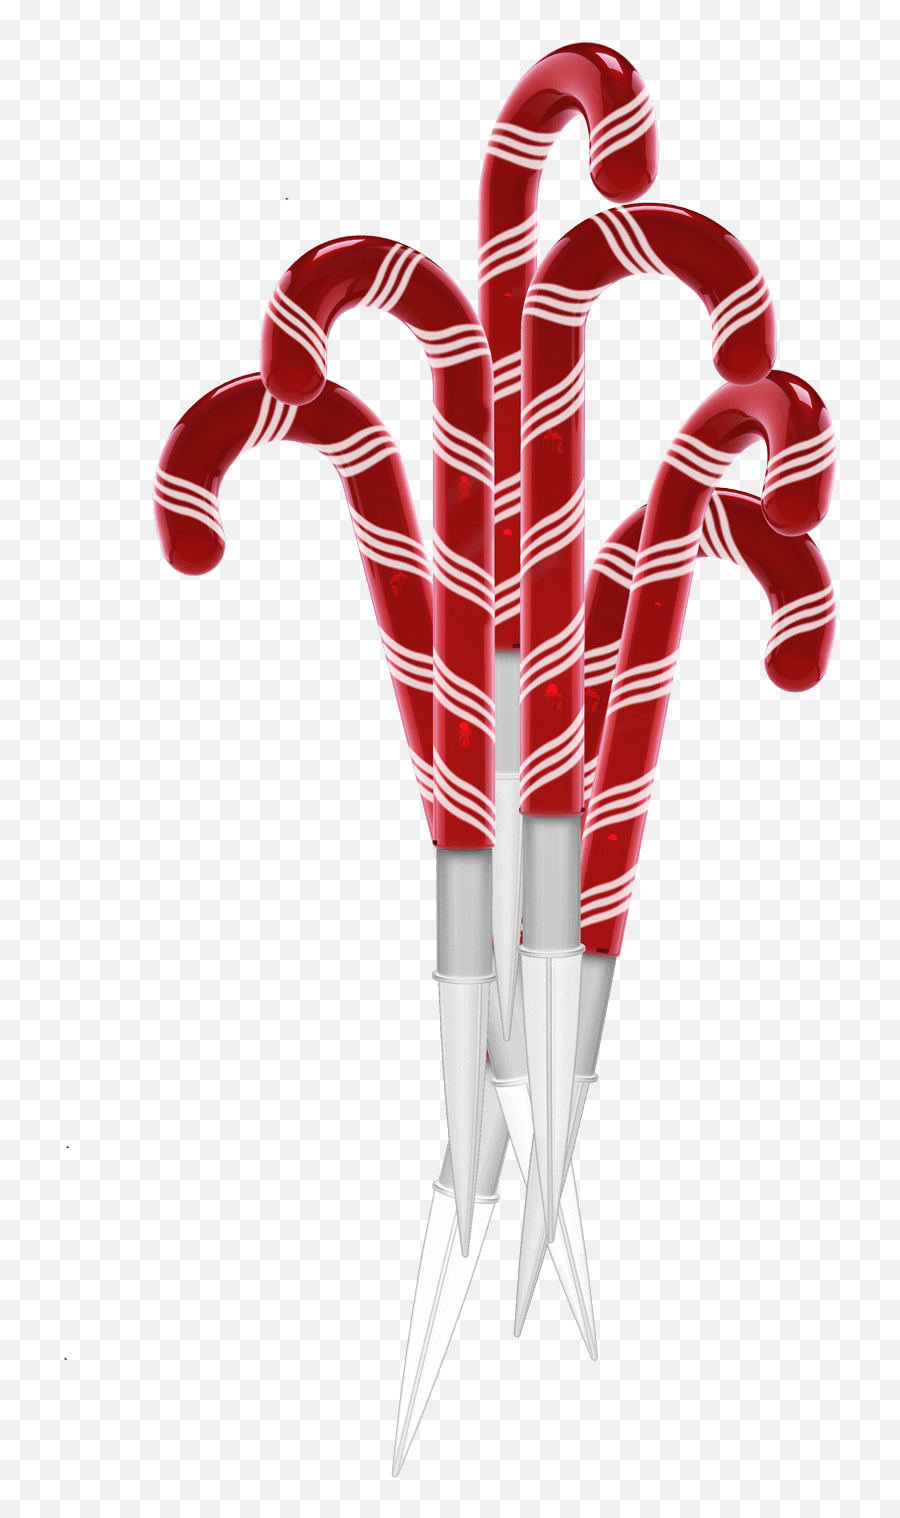 Candy Cane Png - Candy Cane,Candy Cane Png